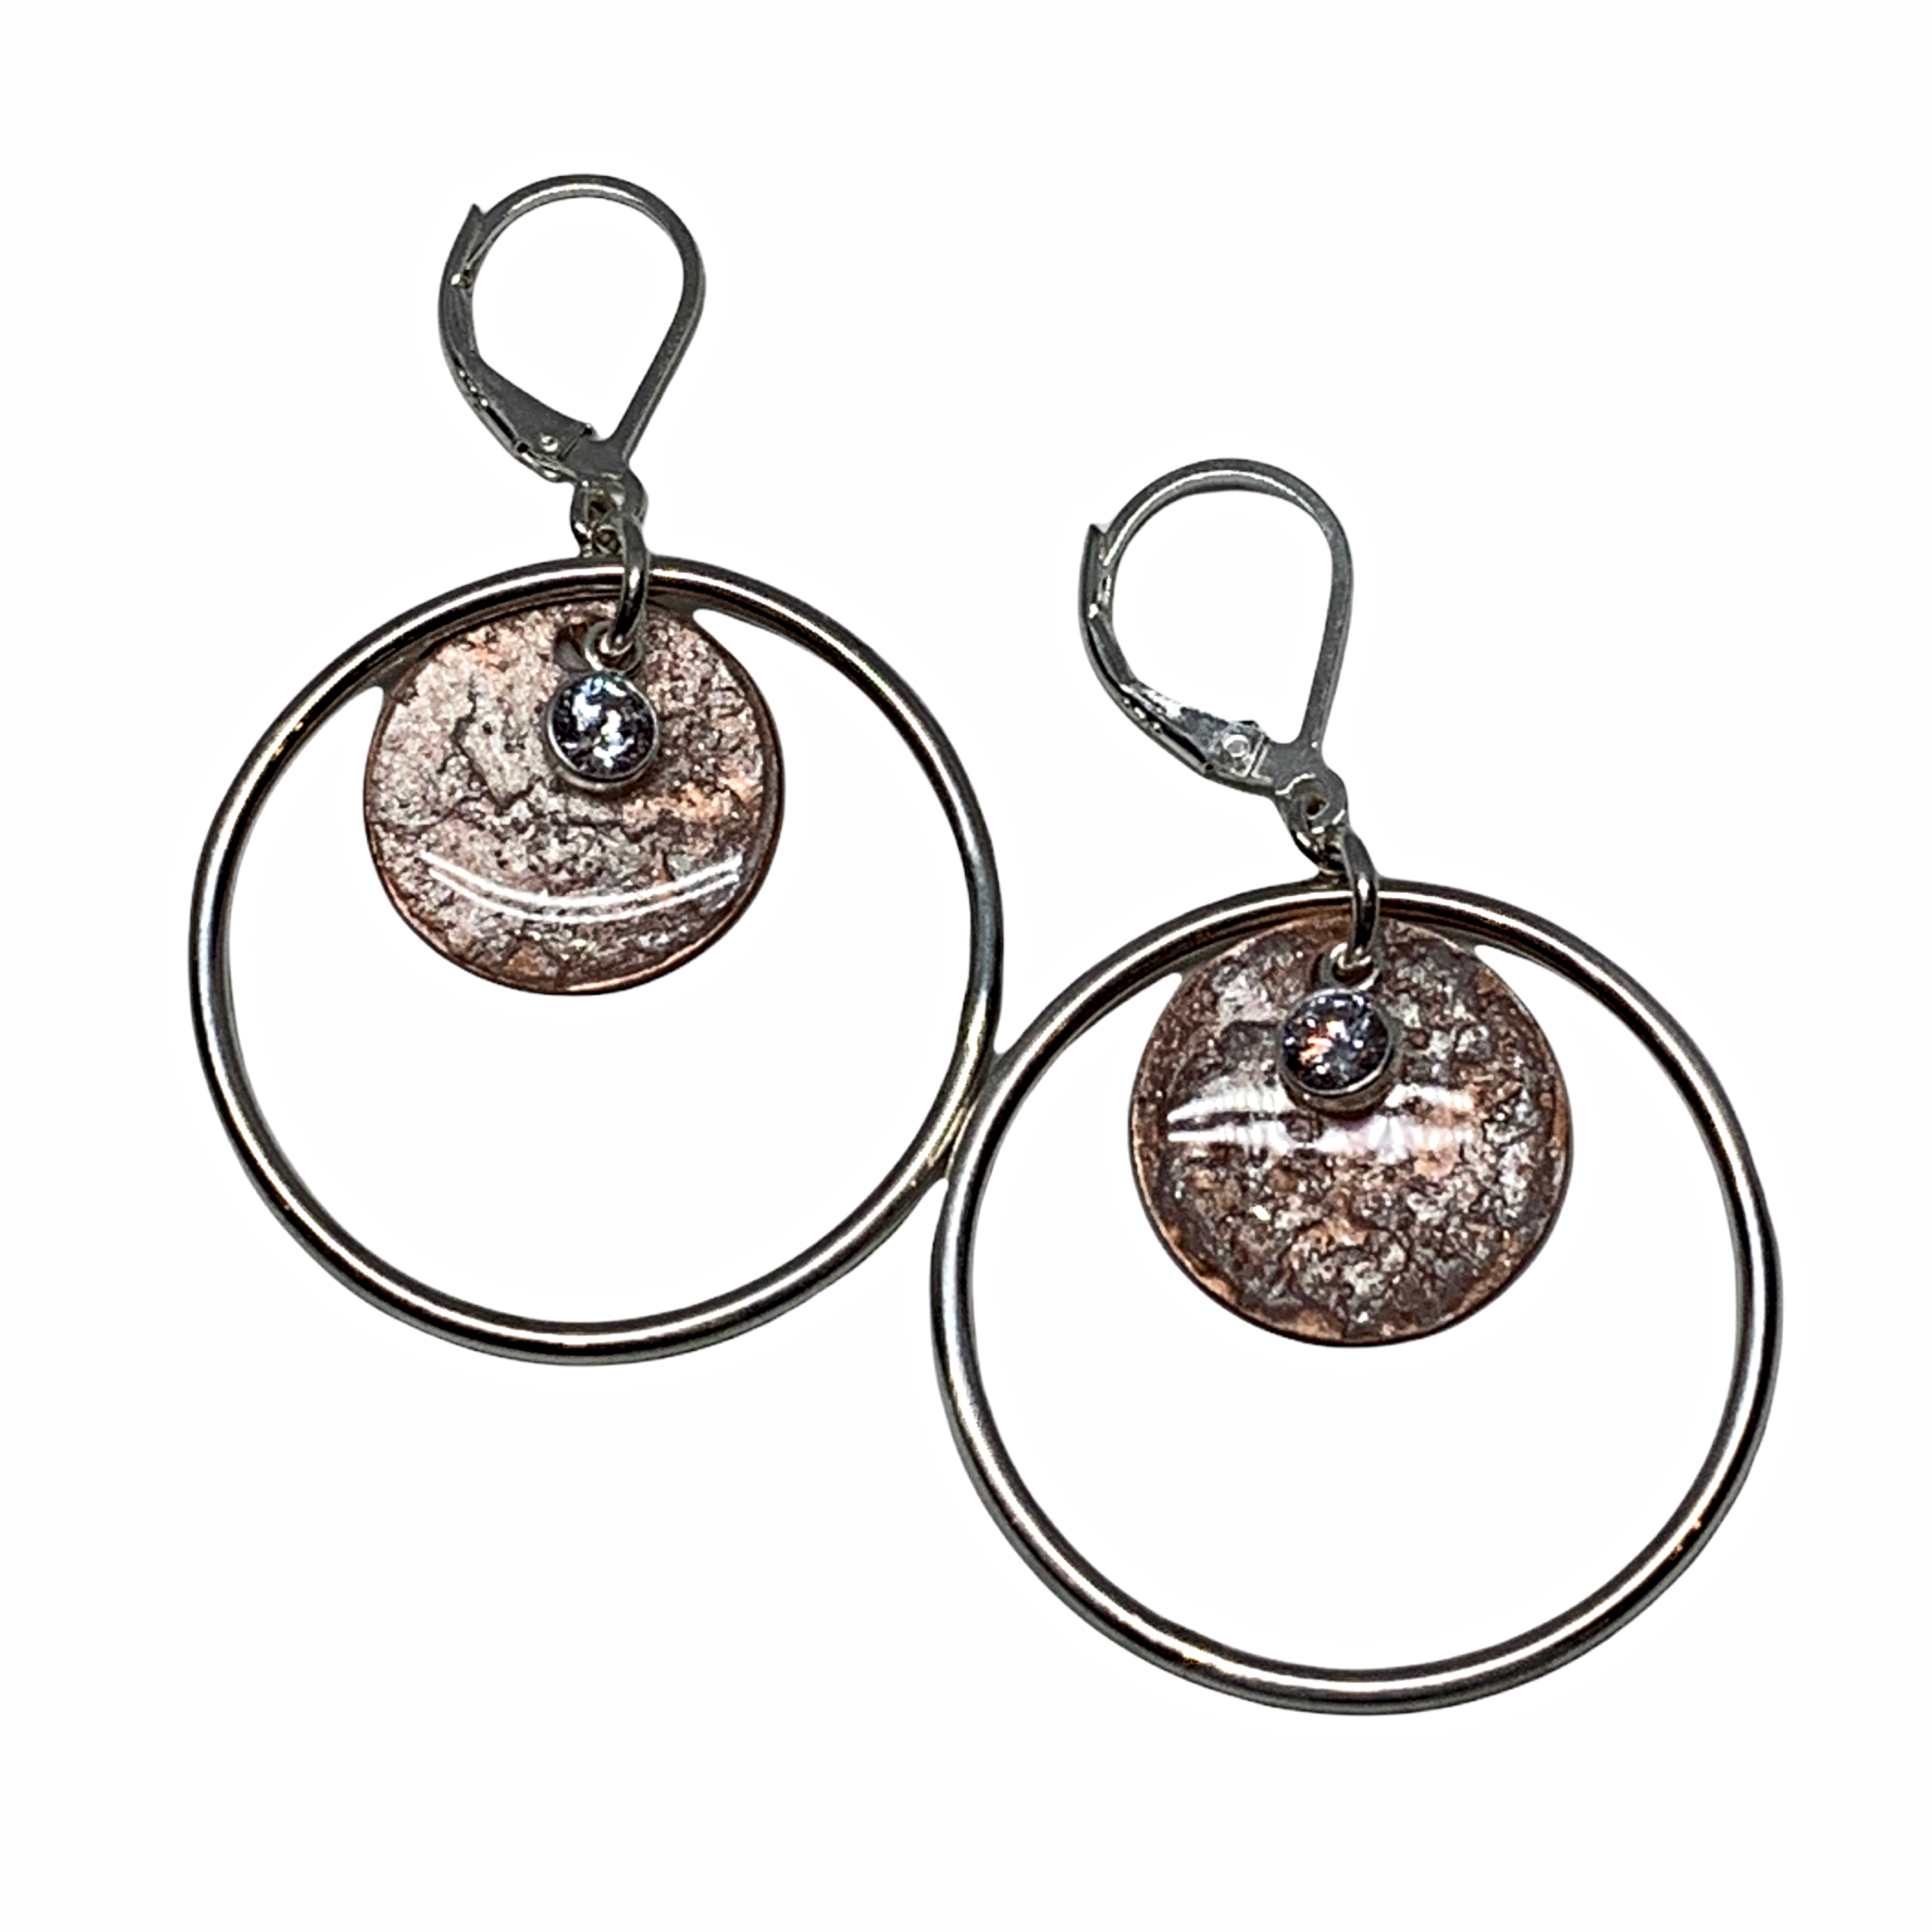 Handmade sterling silver pearlized copper, and CZ earrings by Karyn Chopik | Effusion Art Gallery + Cast Glass Studio, Invermere BC